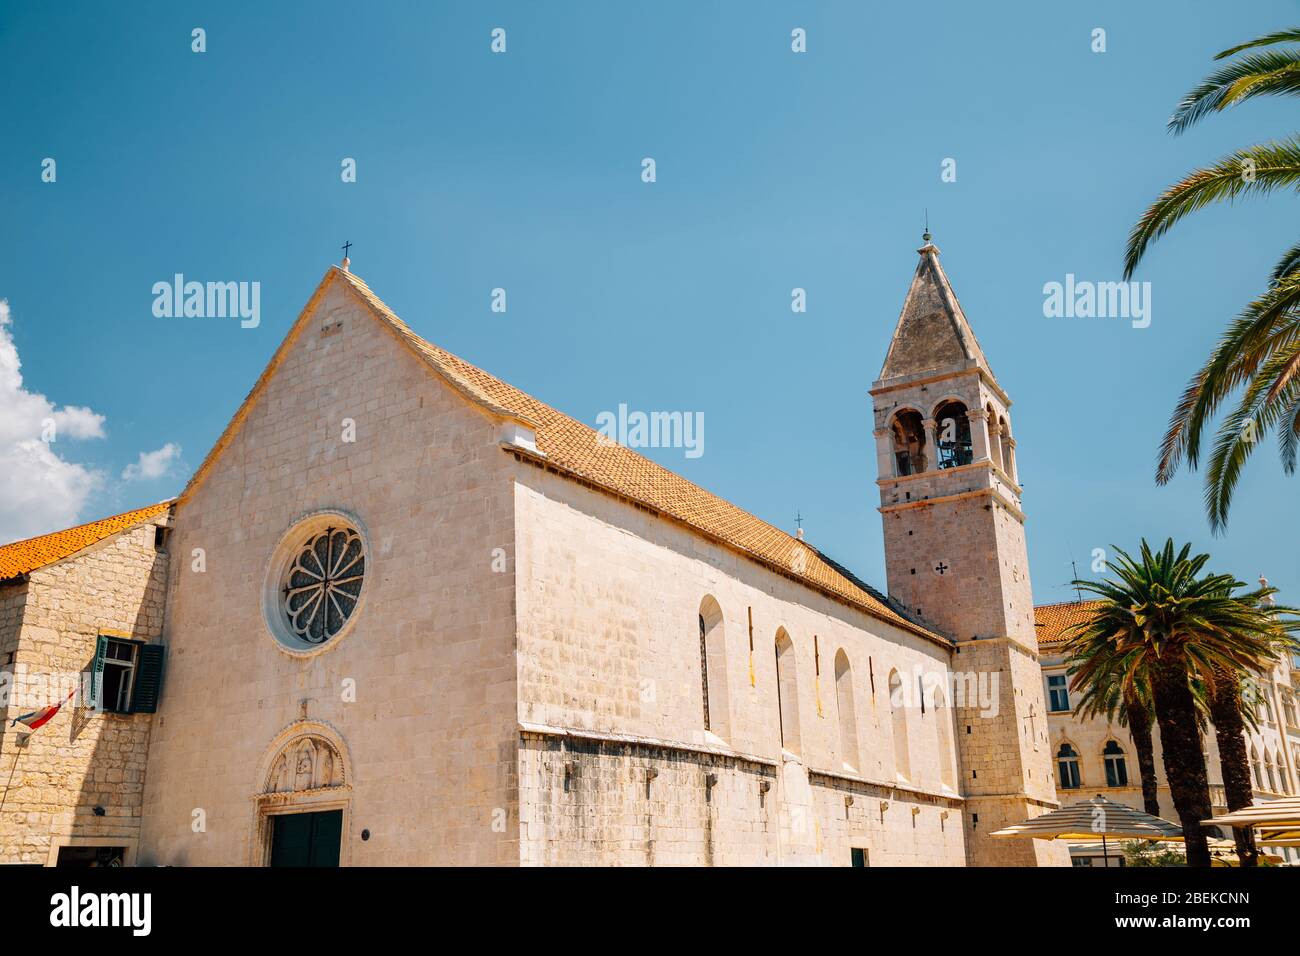 Church of St. Dominic with palm tree in Trogir, Croatia Stock Photo